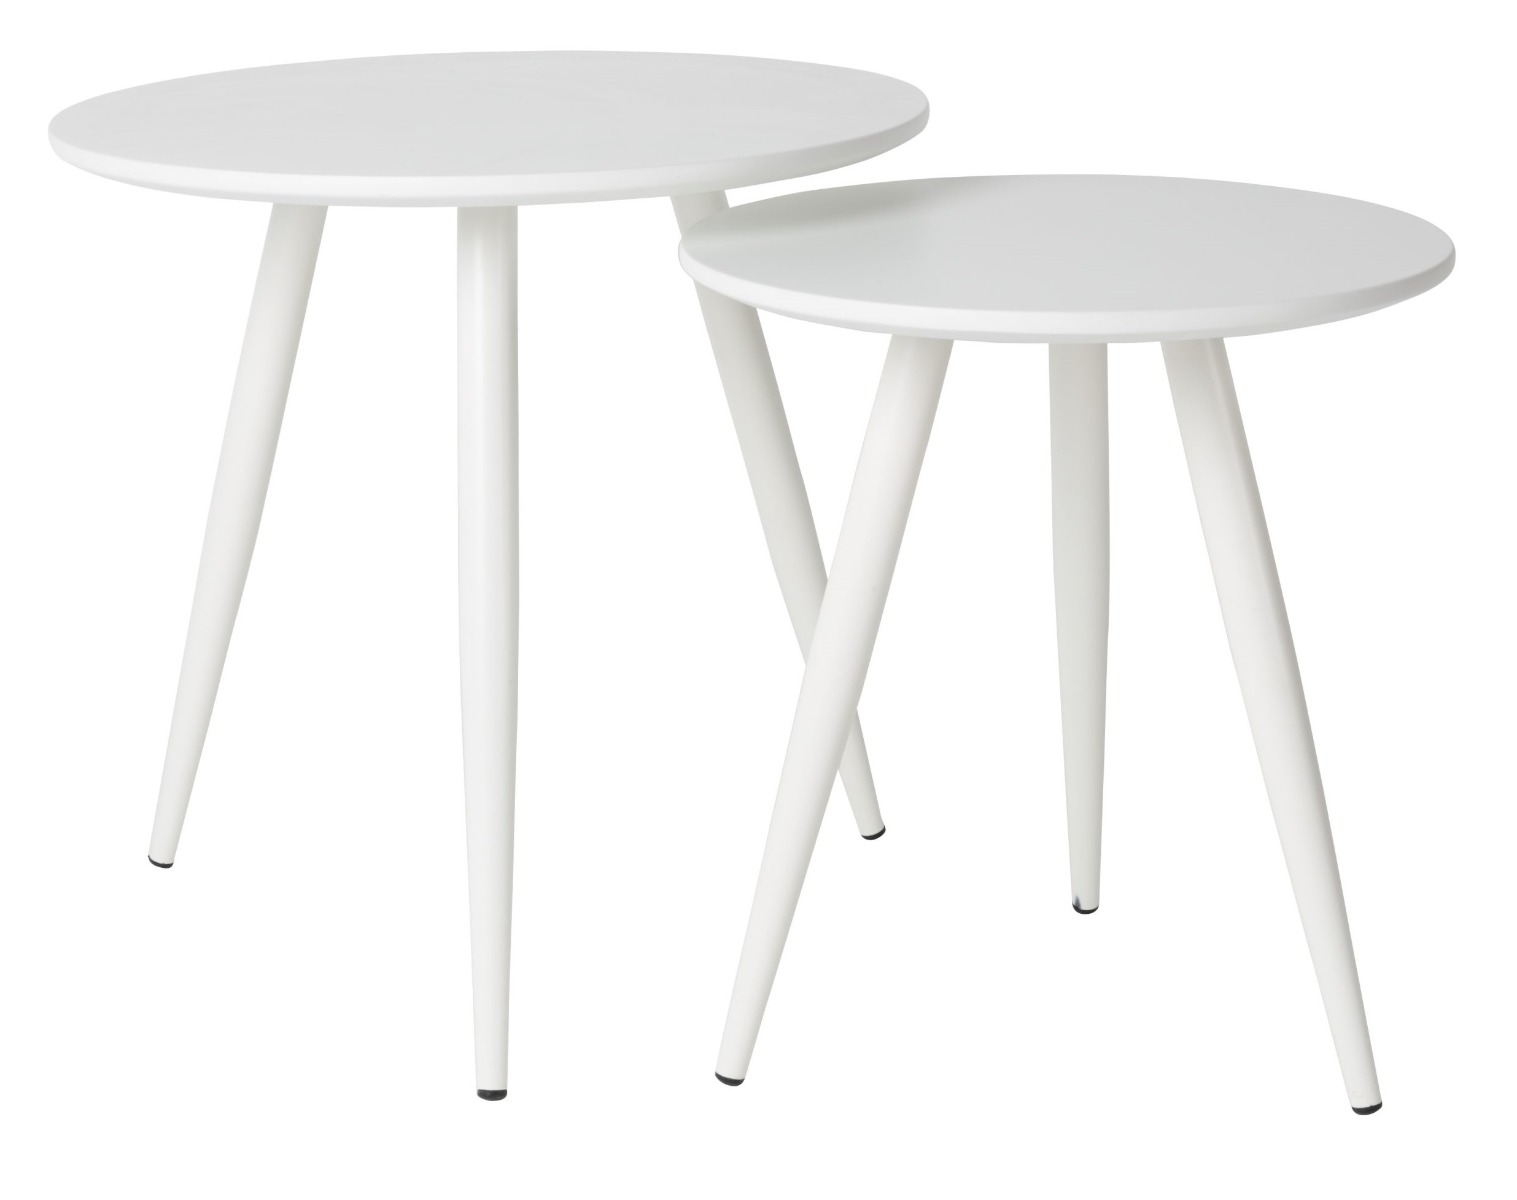 SIDE TABLE DAVEN WHITE SET OF 2